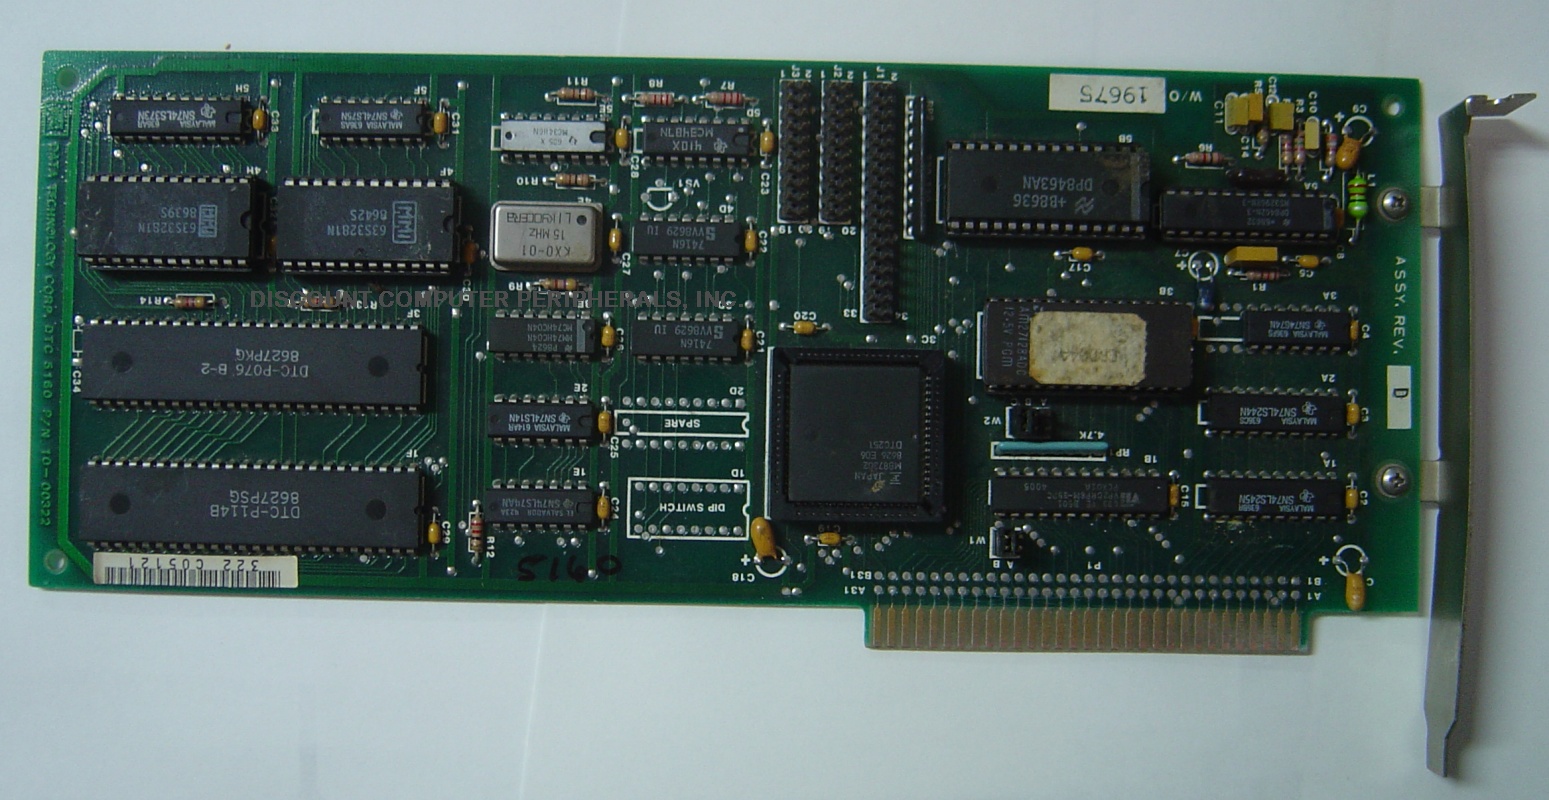 DTC 5160 - 8 BIT ISA RLL HARD  DRIVE CONTROLLER - Call or Email